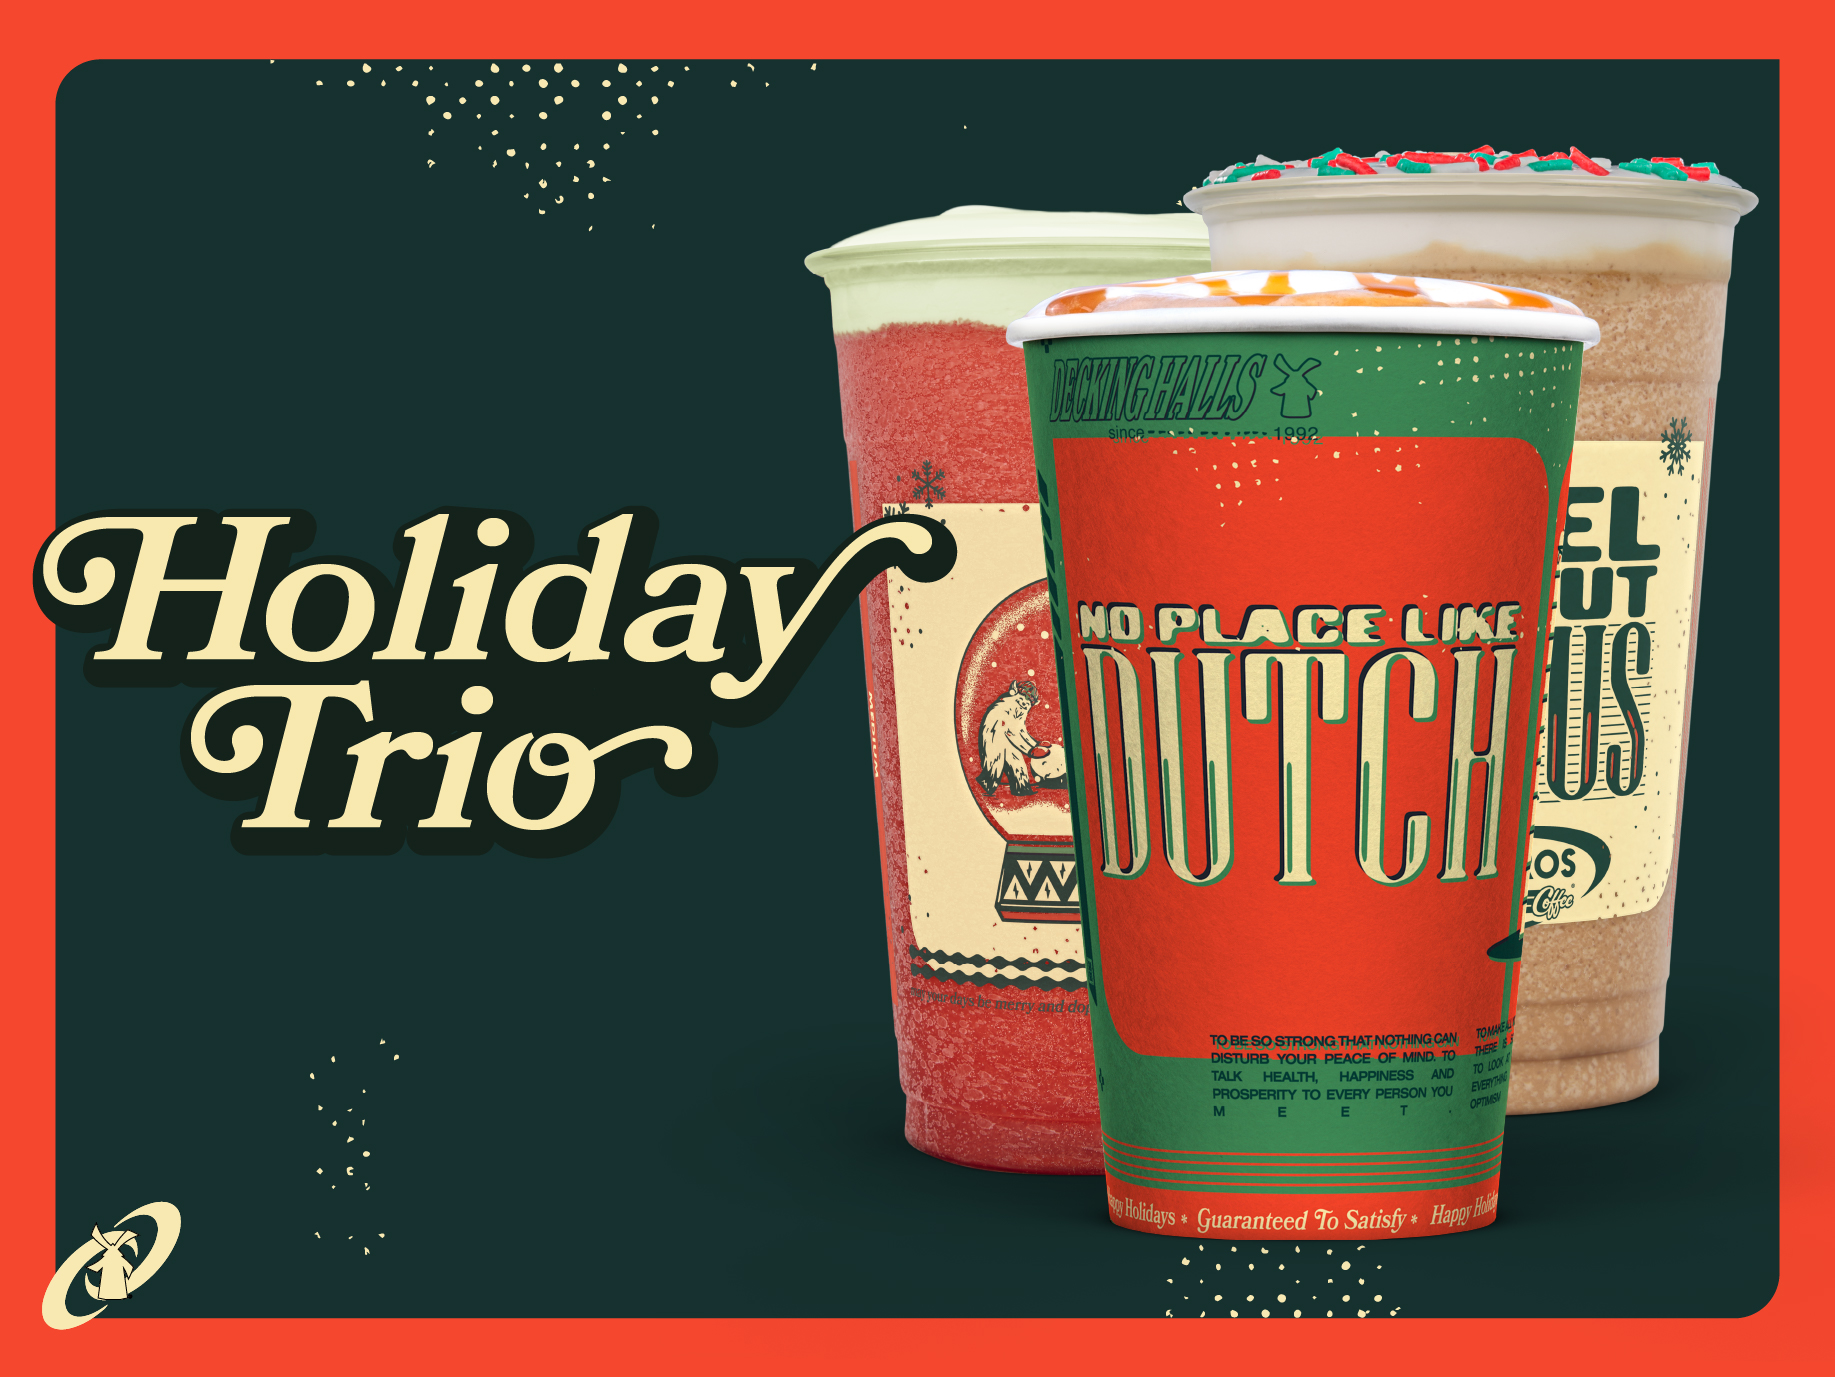 Holiday Trio: This year, Dutch Bros’ Holiday Trio includes the Hazelnut Truffle Mocha, the Merry Mischief Rebel and the Snow Cap Freeze.